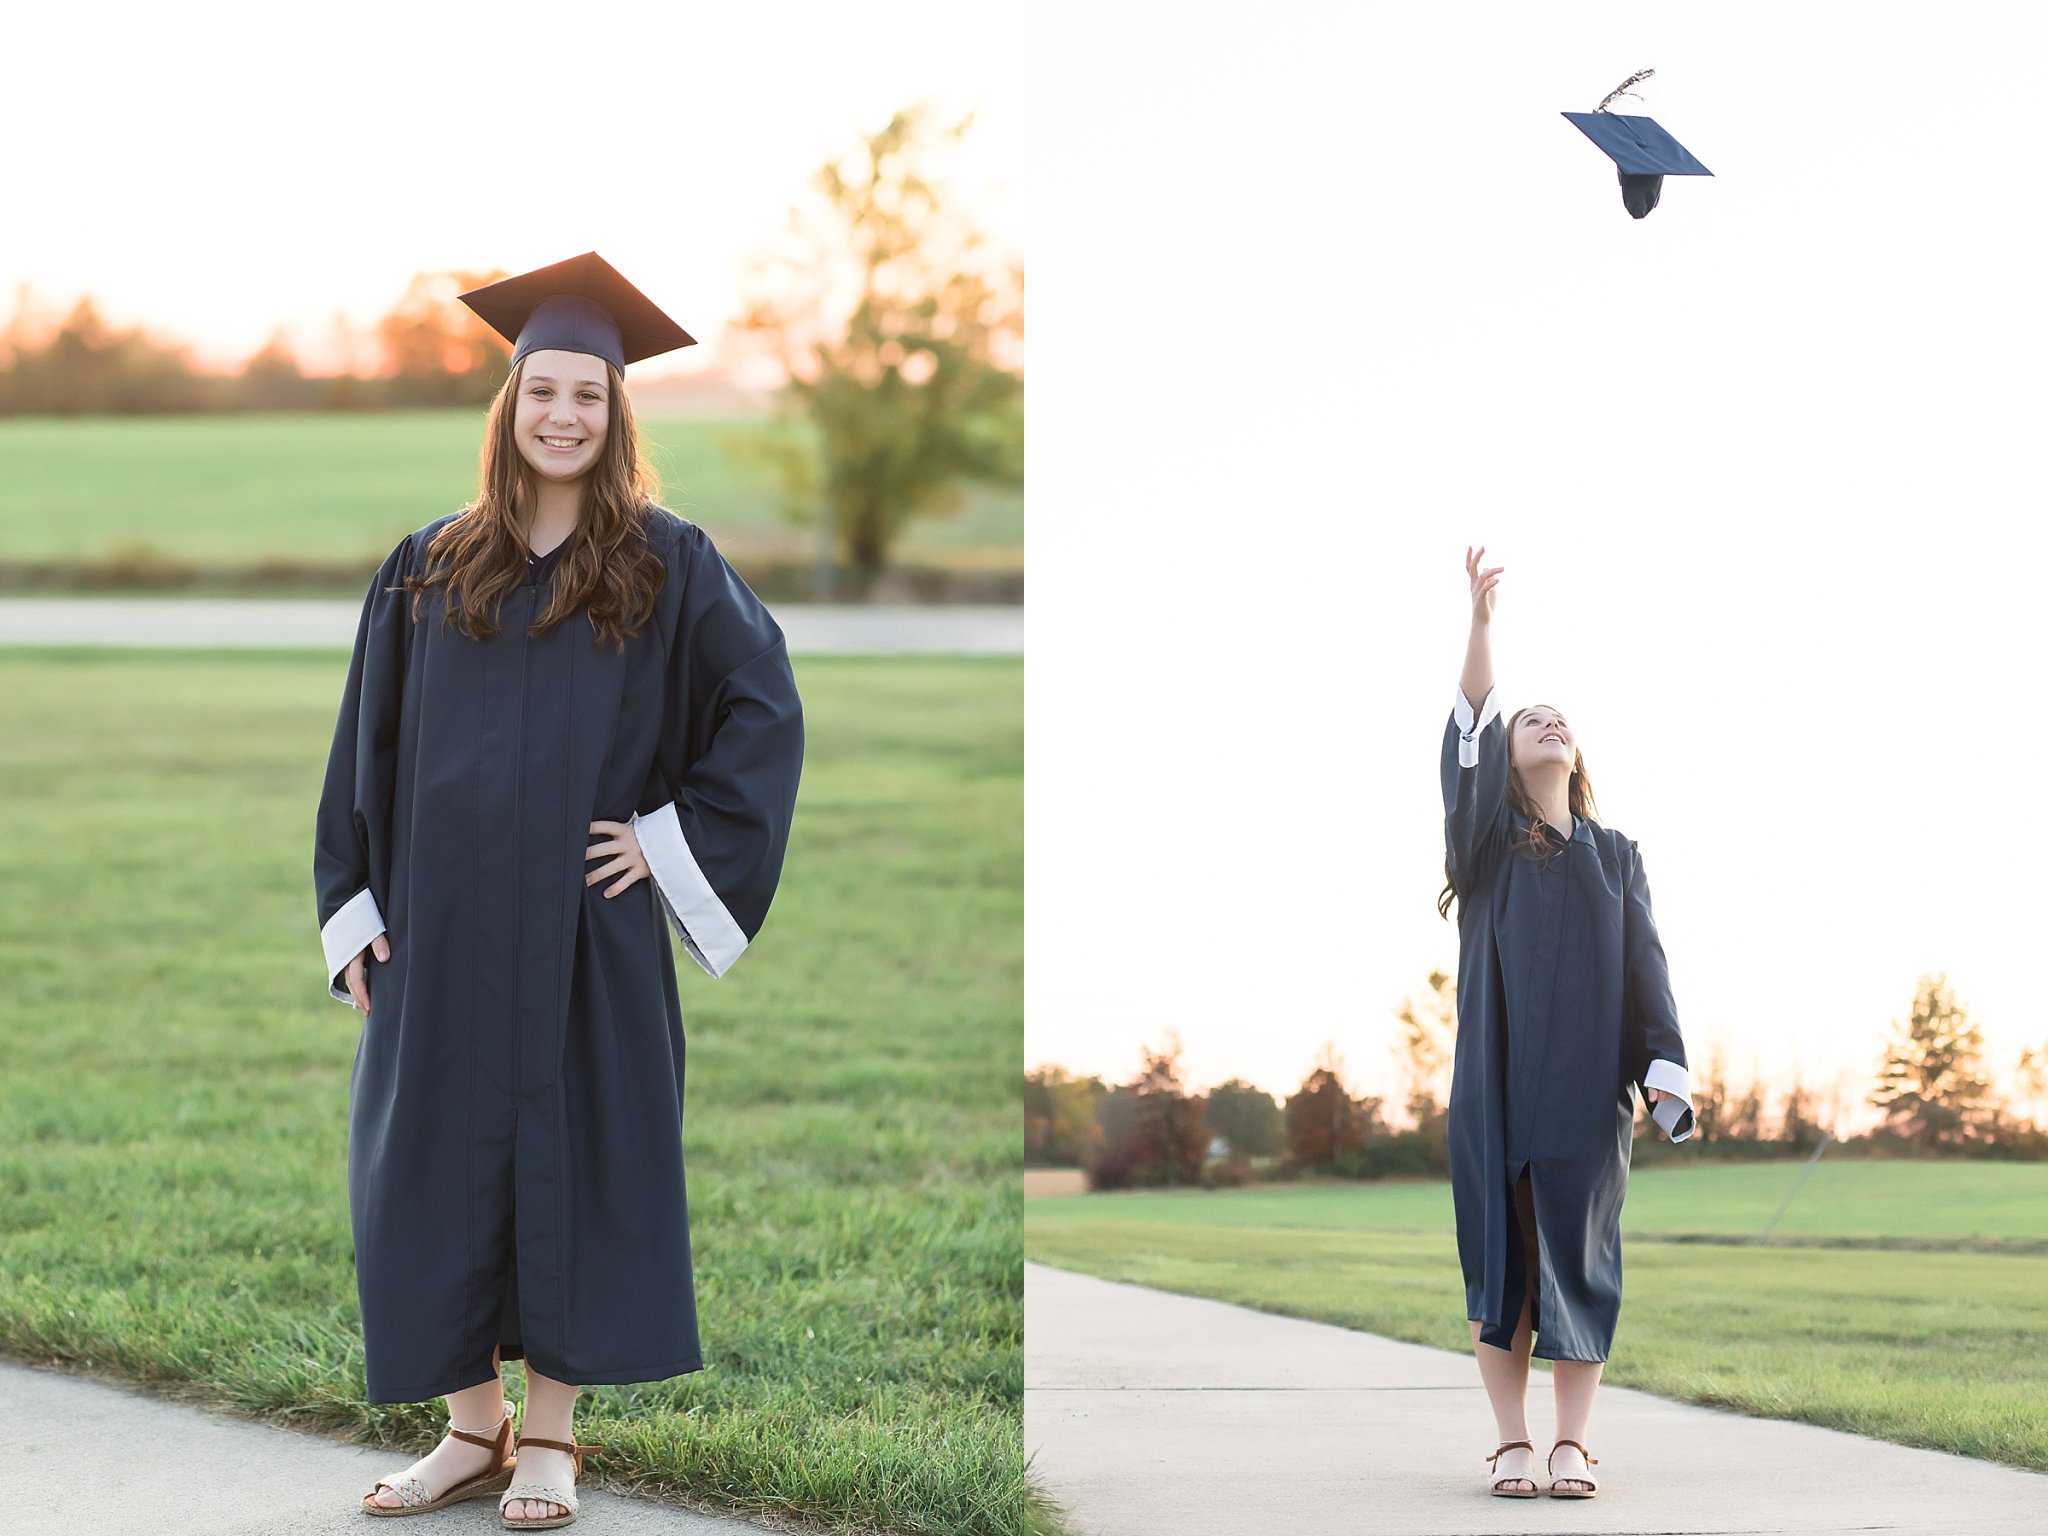 Cap and Gown Mini Sessions photos by Simply Seeking Photography